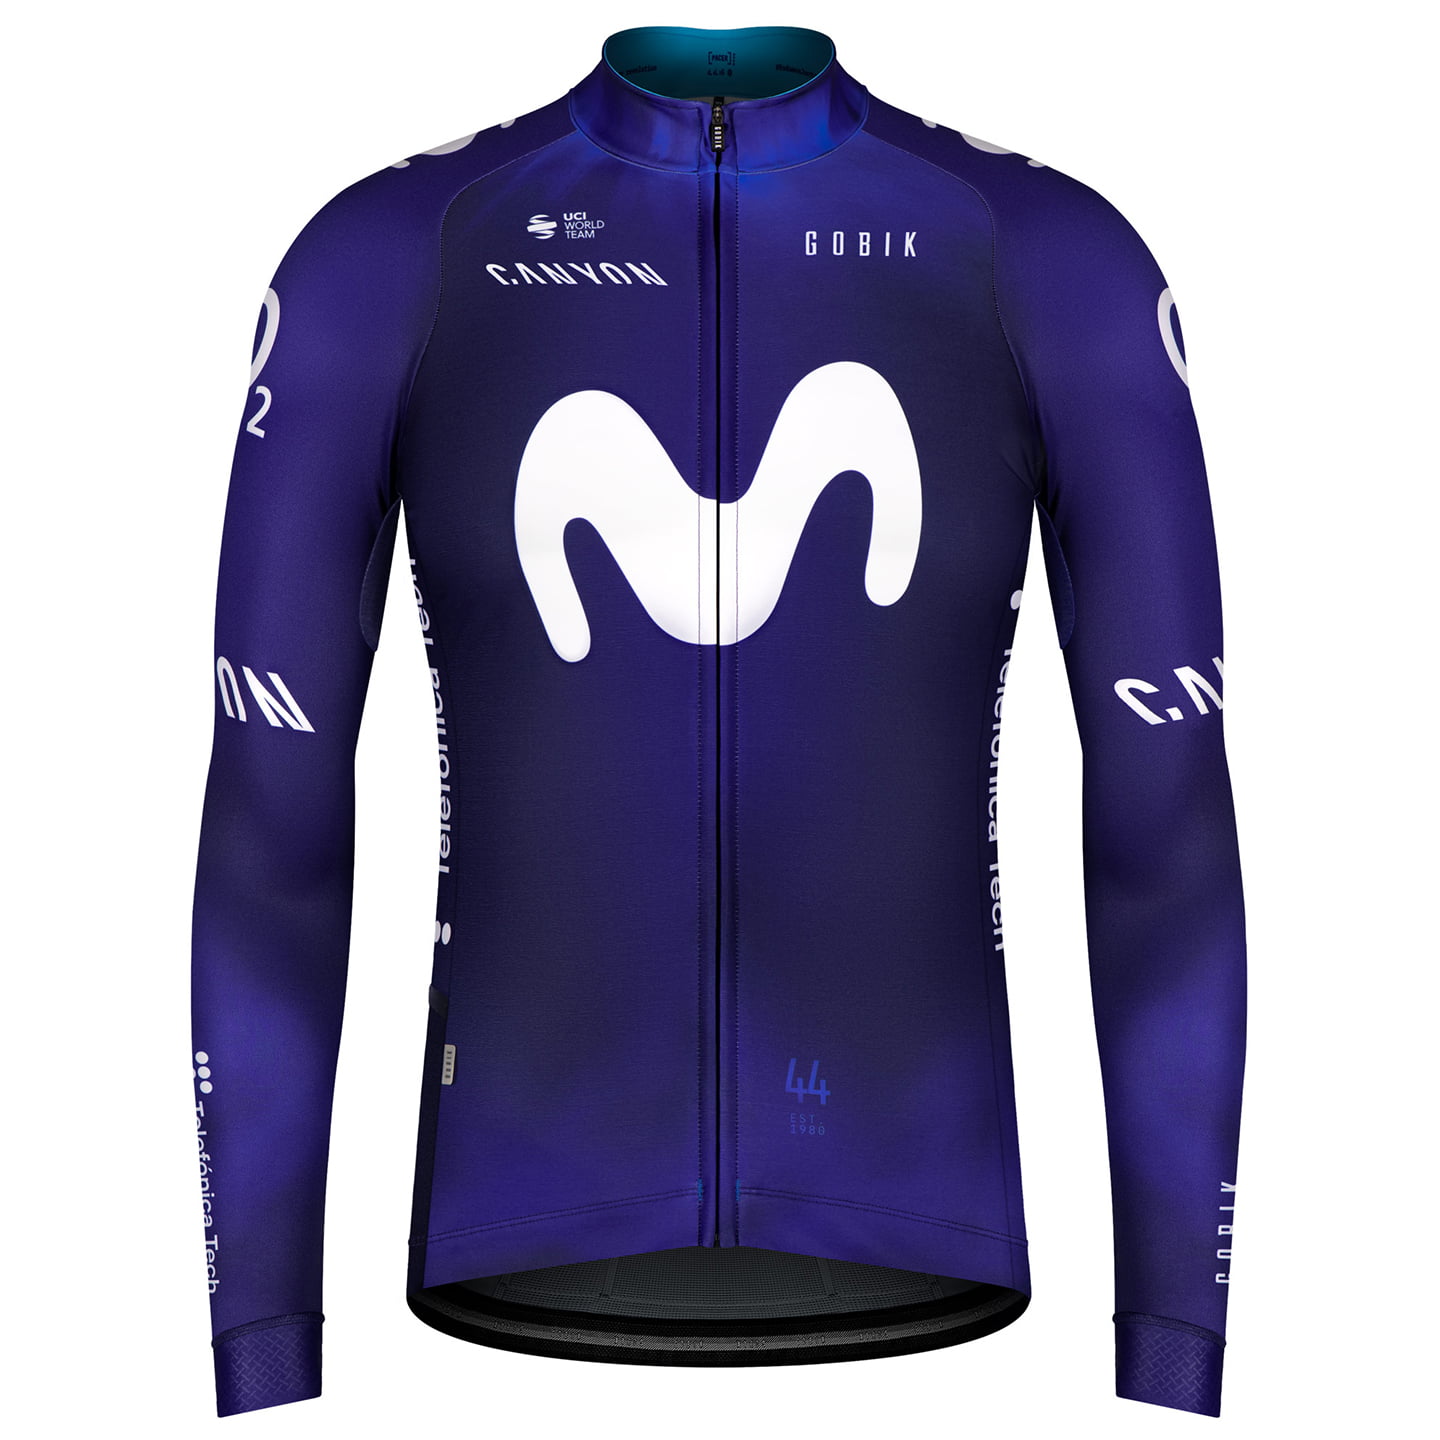 MOVISTAR TEAM Race 2023 Long Sleeve Jersey, for men, size L, Cycling shirt, Cycle clothing